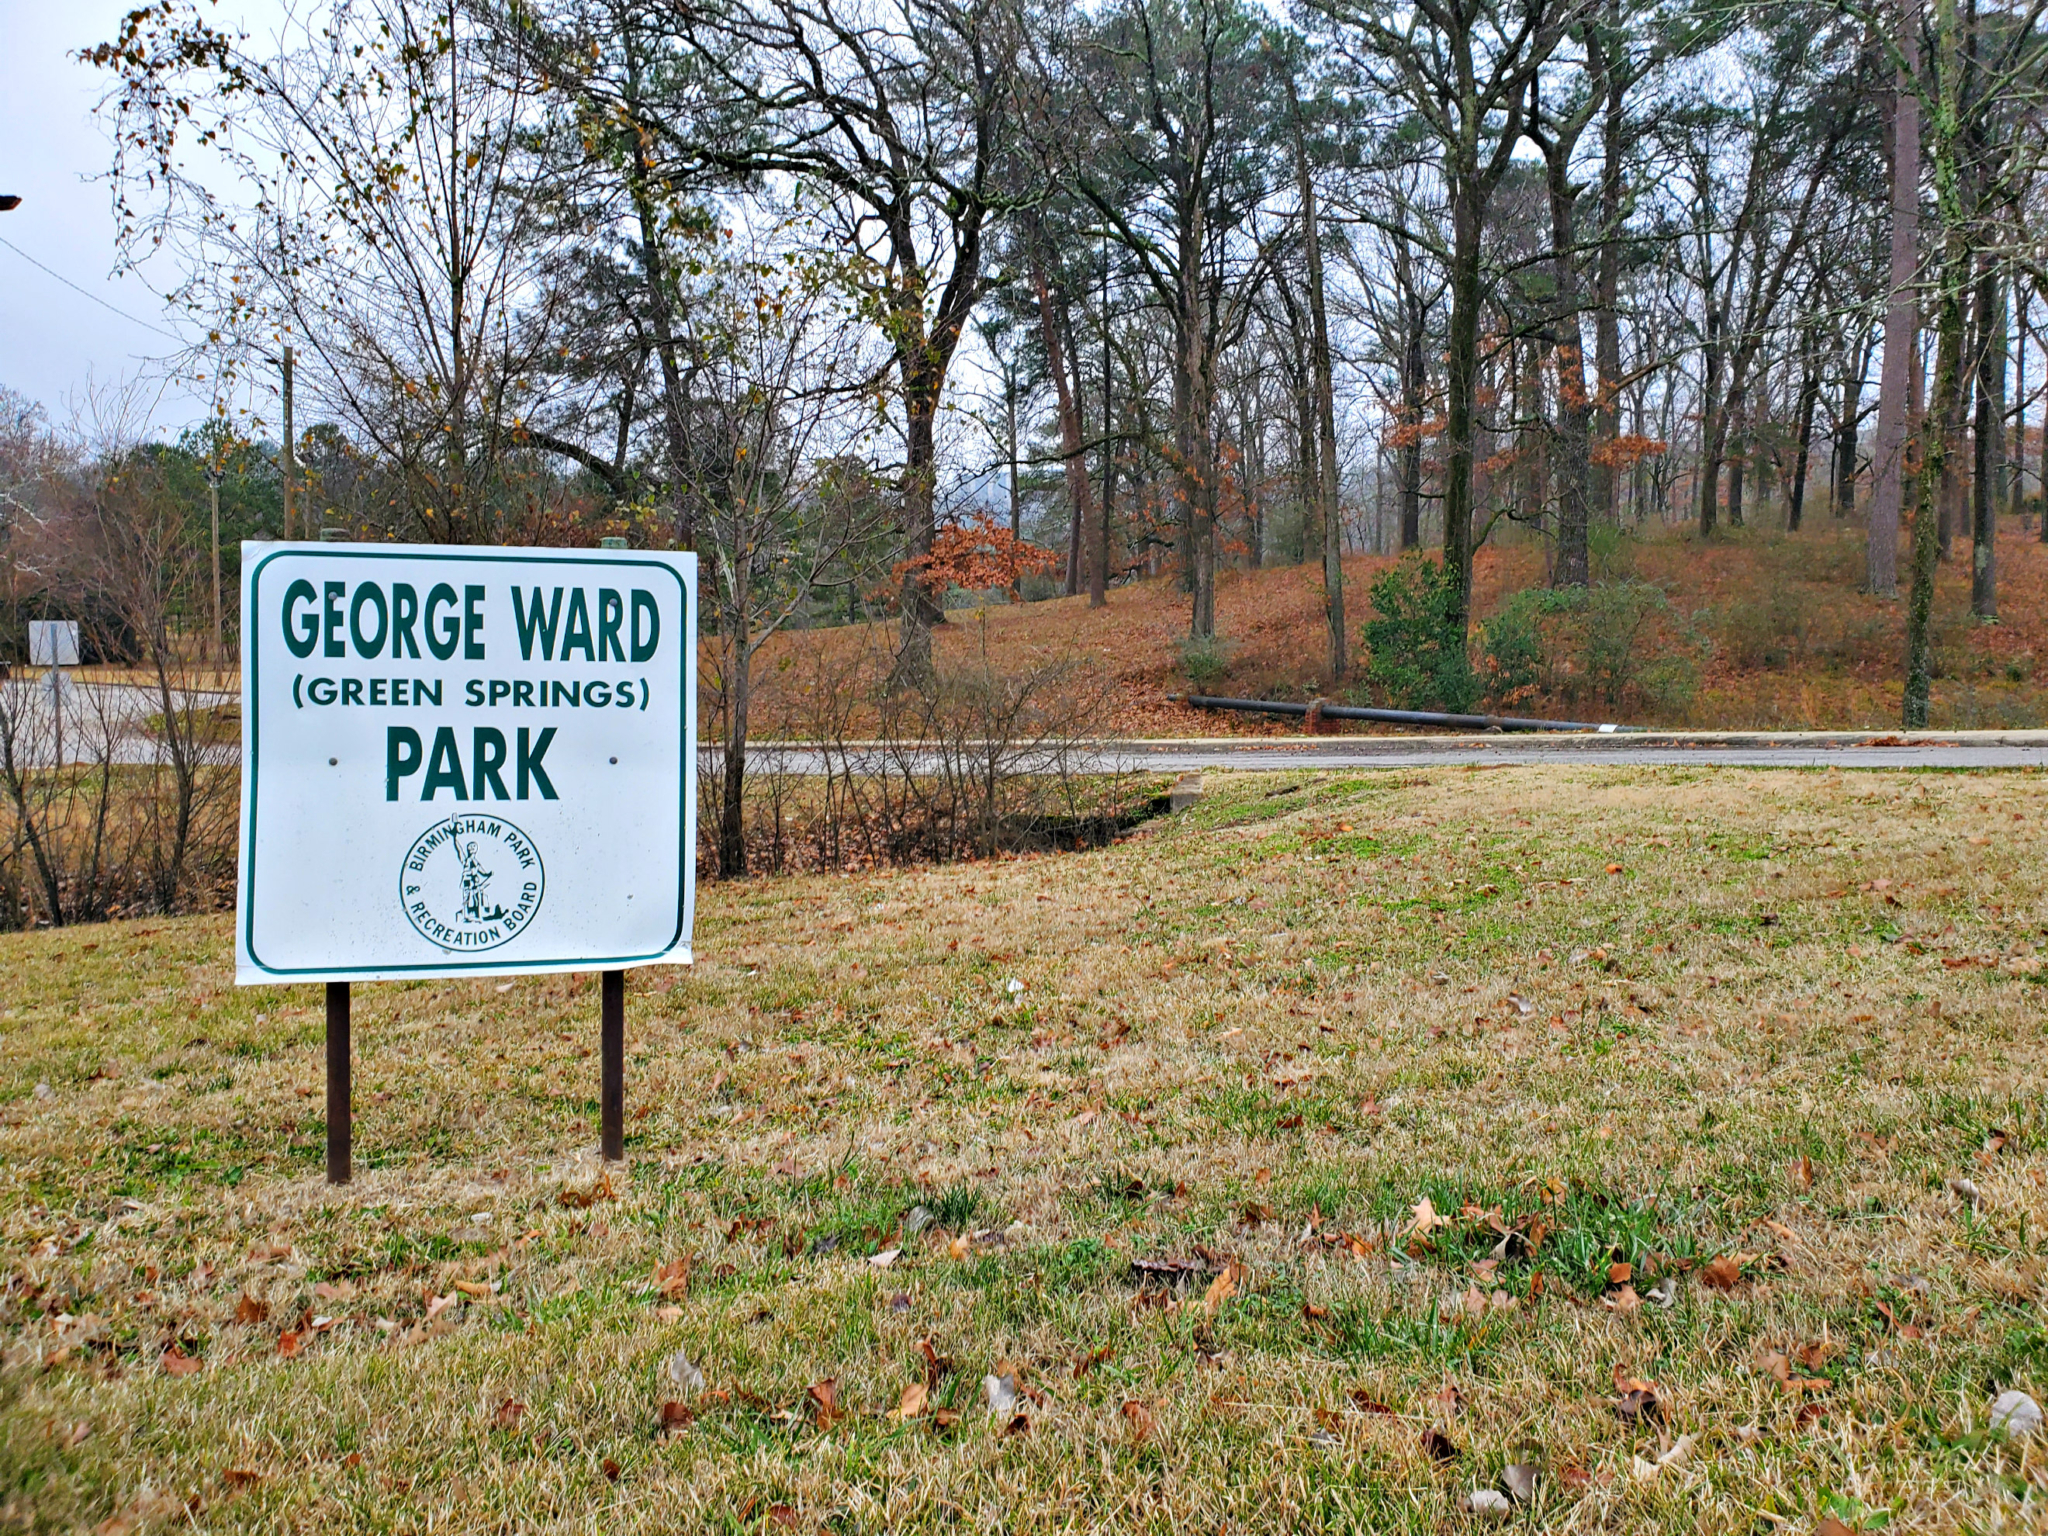 George Ward (Green Springs) Park sign and trees in Green Springs